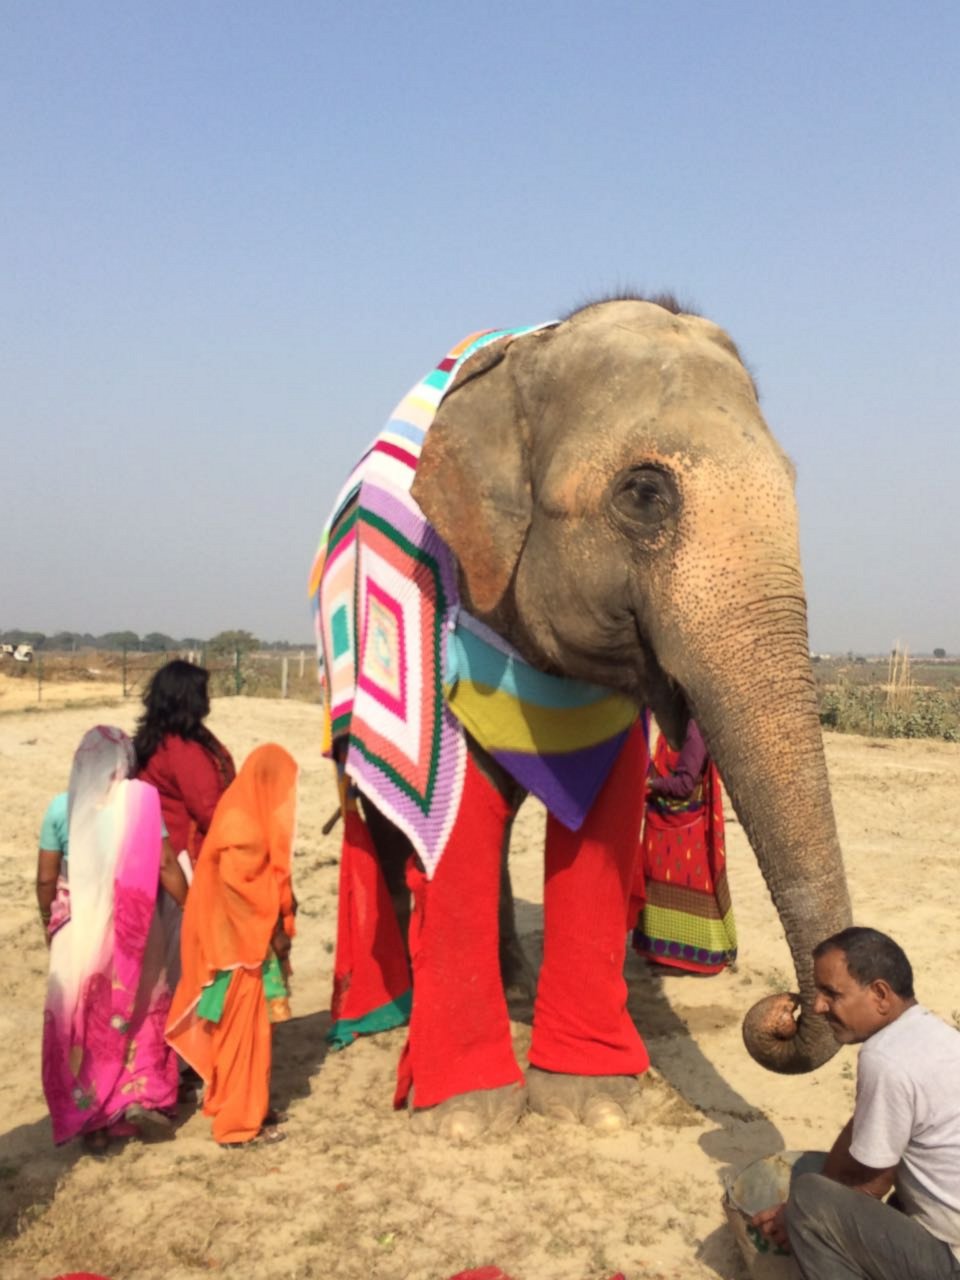 PHOTO: Wildlife SOS, a non-profit based in Asia, is helping elephants in Northern India stay warm with colorful knit sweaters.